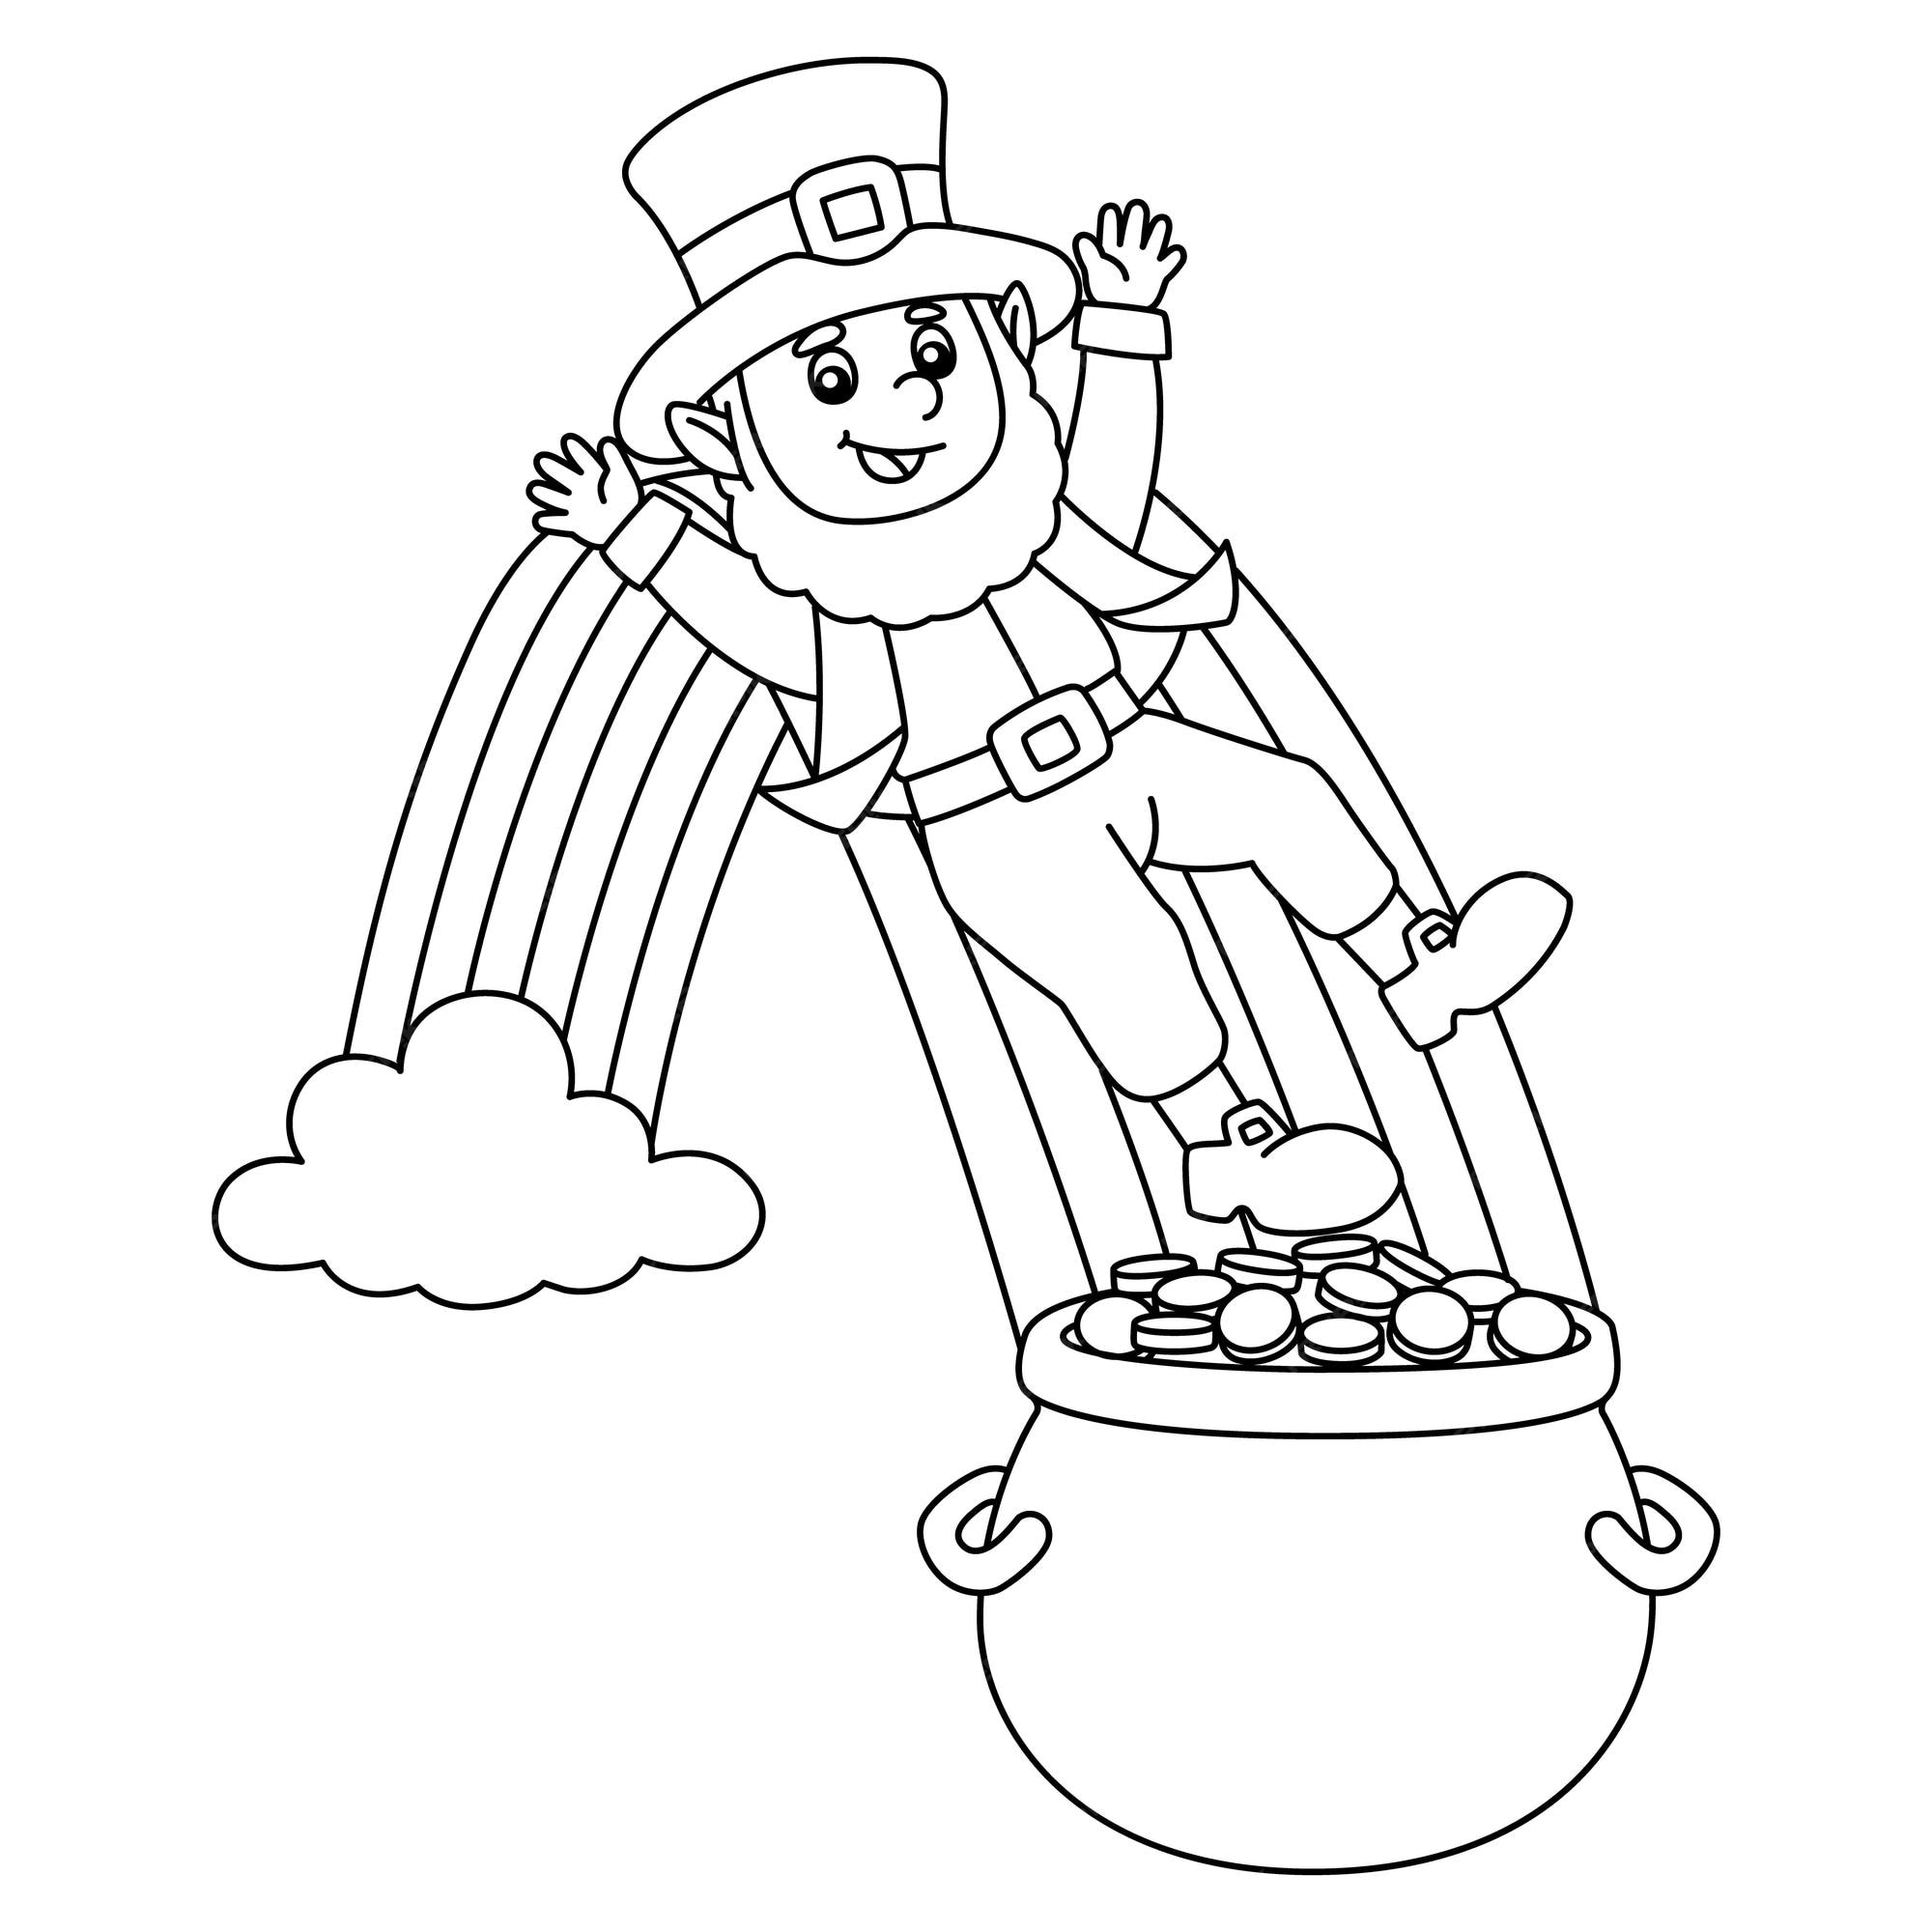 Premium vector a cute and funny coloring page of a st patricks day leprechaun on a rainbow provides hours of coloring fun for children to color this page is very easy